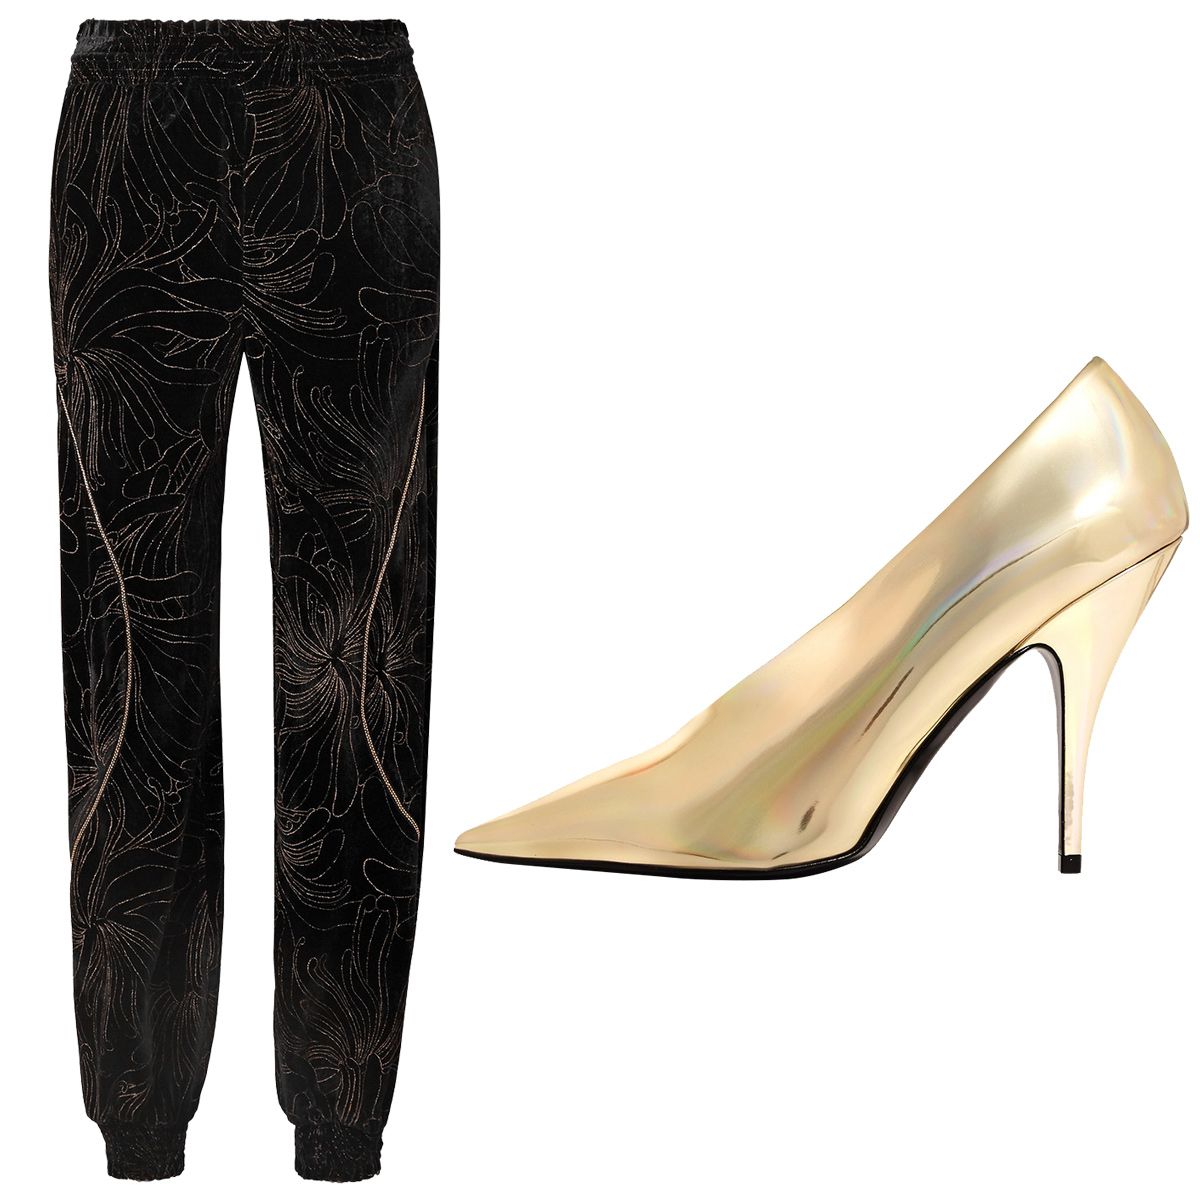 Printed Velvet Pants with Metallic Faux Leather Pumps